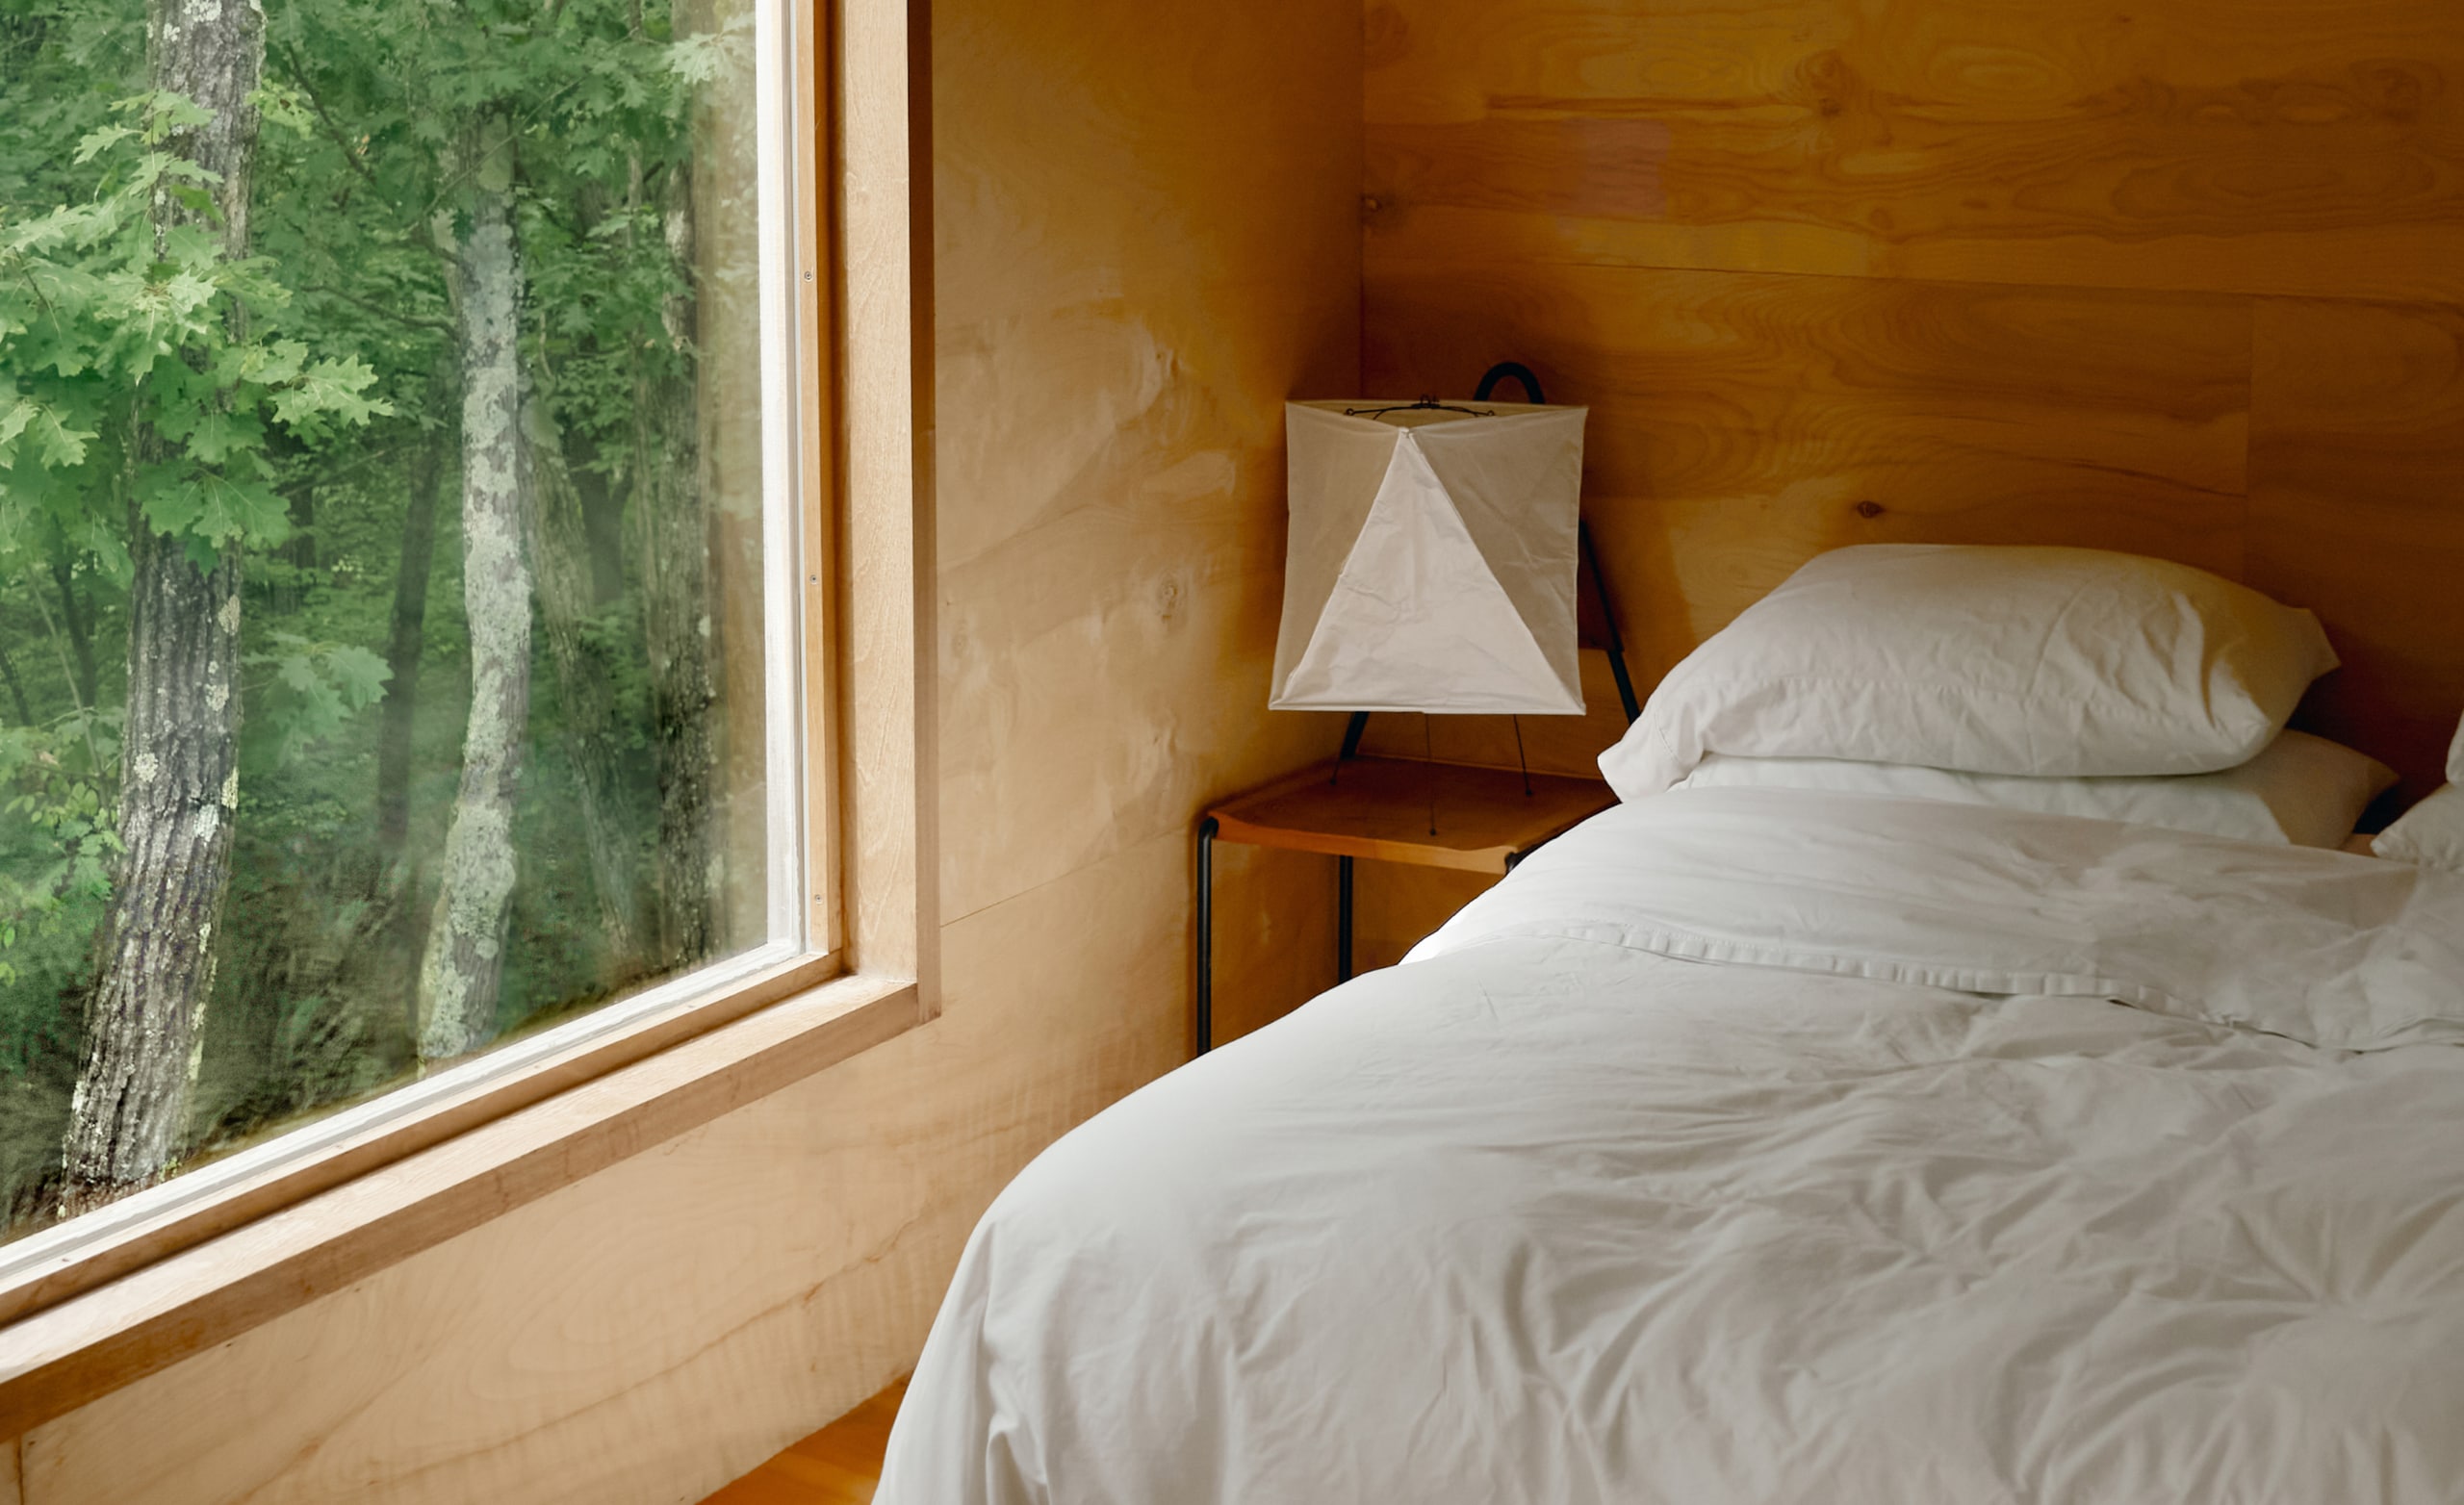 A bedroom with white sheets on a freshly made bed and a large window showing trees outside.